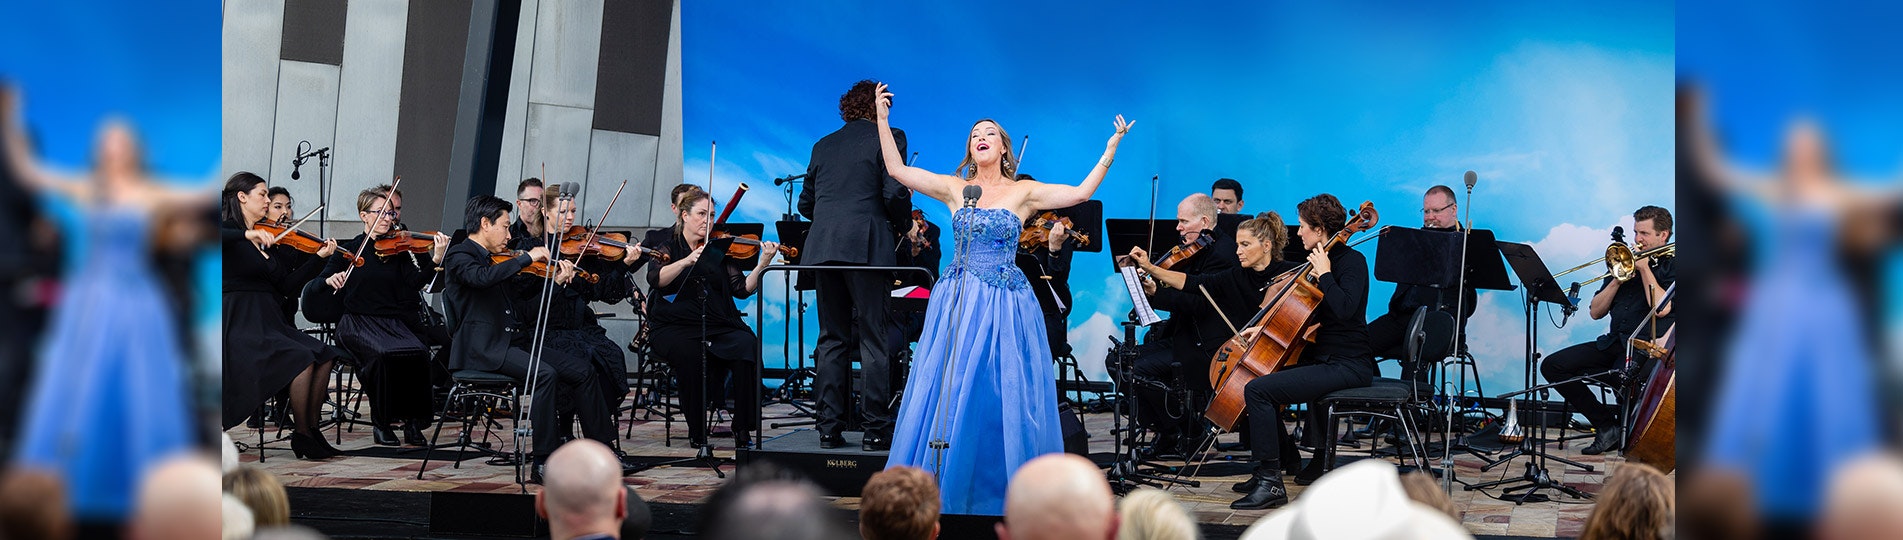 An opera singing is standing on stage with their arms outstrechted in a blue gown, approximately 16 orchstral musicians can be seen behind the singer with a conductor directly behind the singer with their back to the crowd